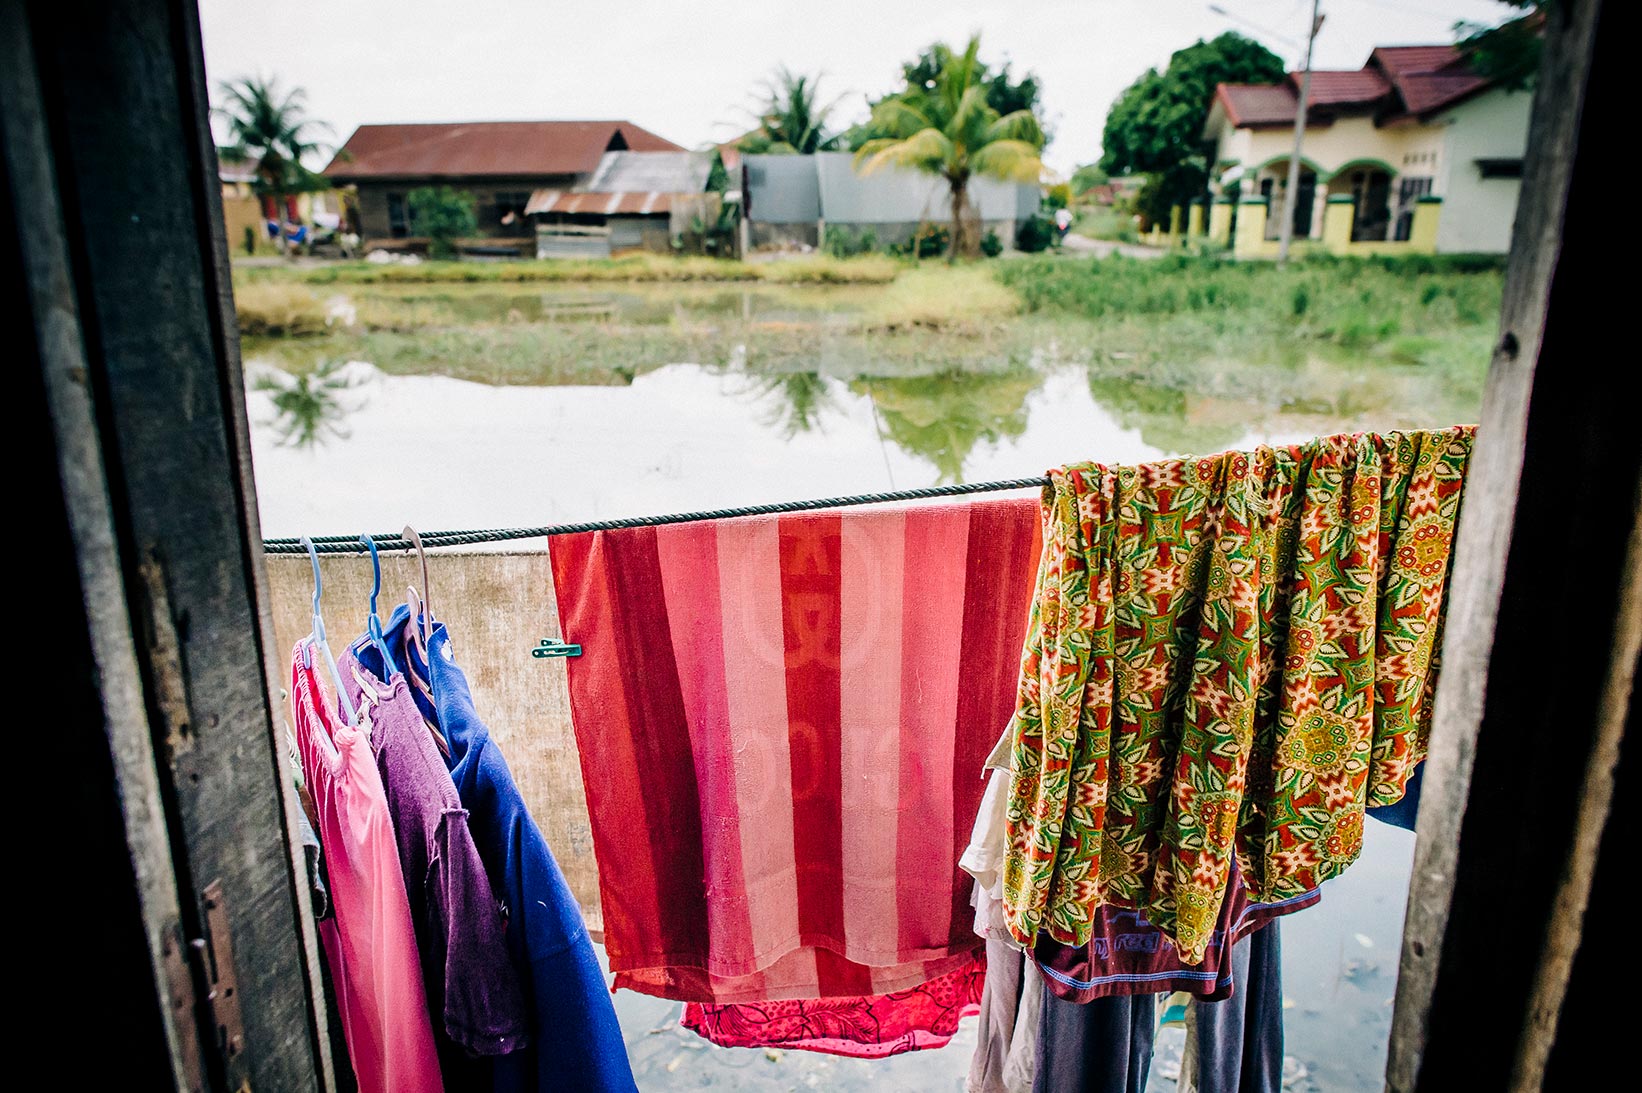 Clothes hang up to dry outside a woman's home in Indonesia.